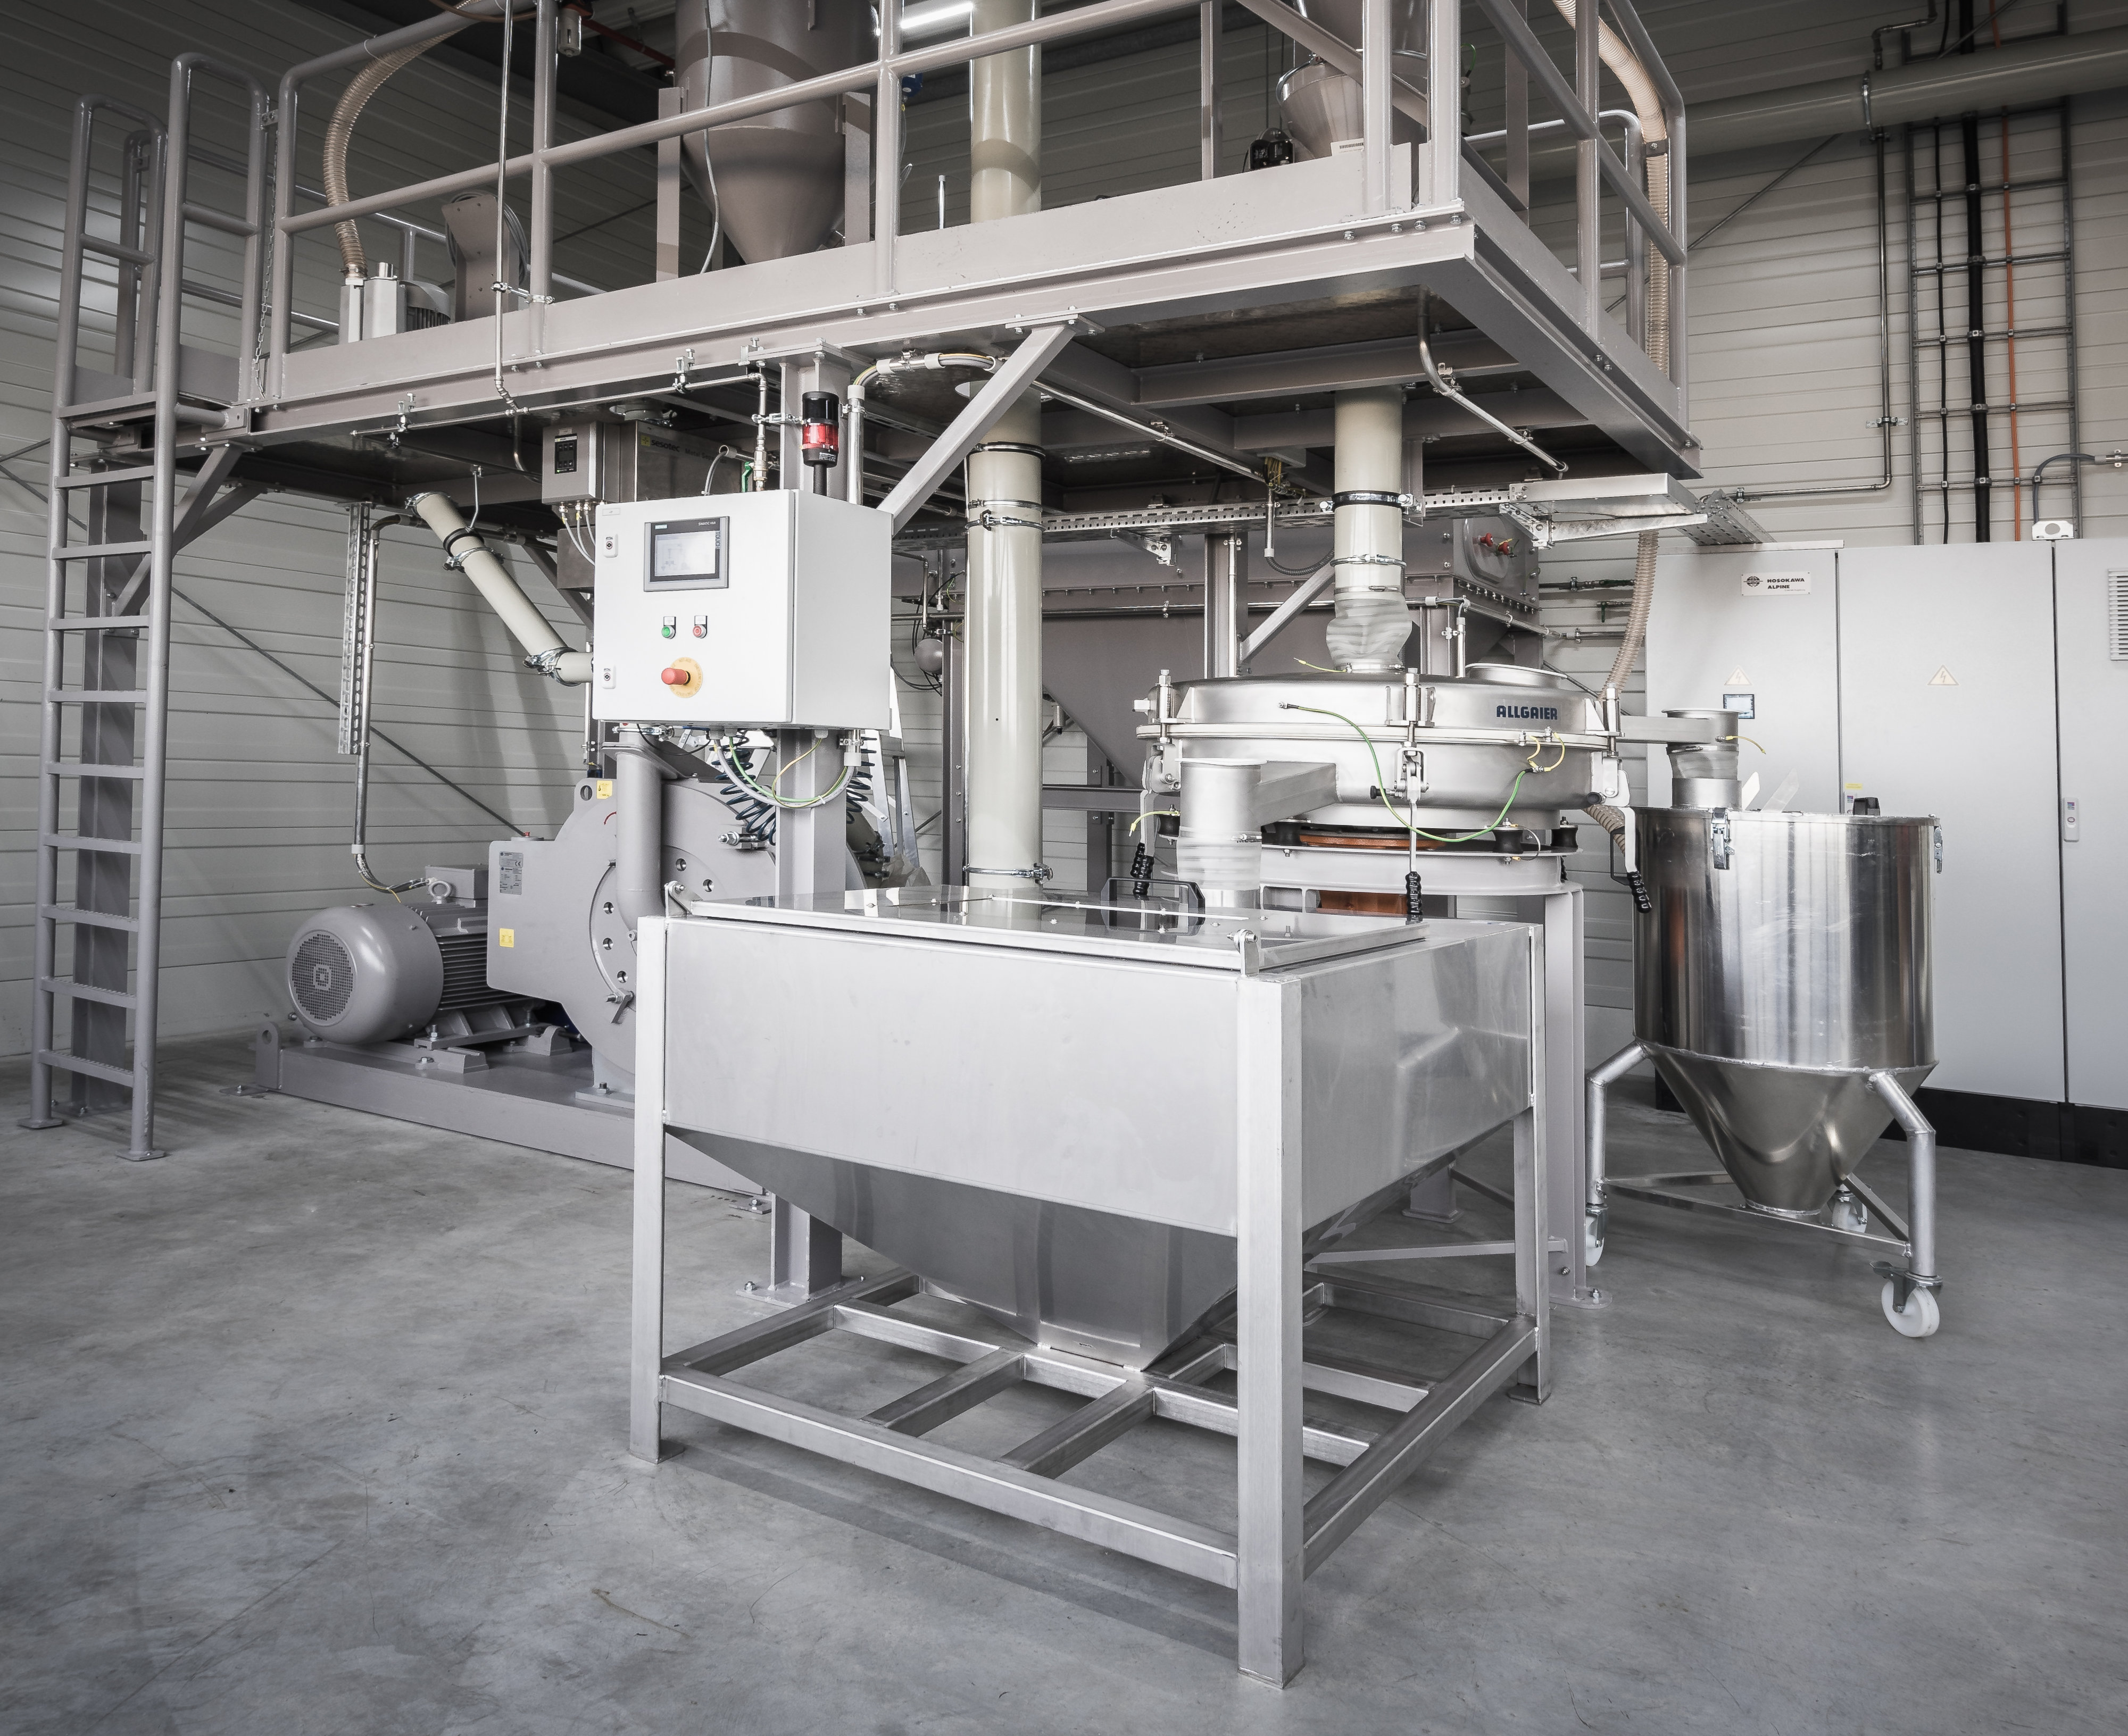 Ensinger’s new polymer pulveriser machine at its subsidiary plant in Cham, Bavaria.